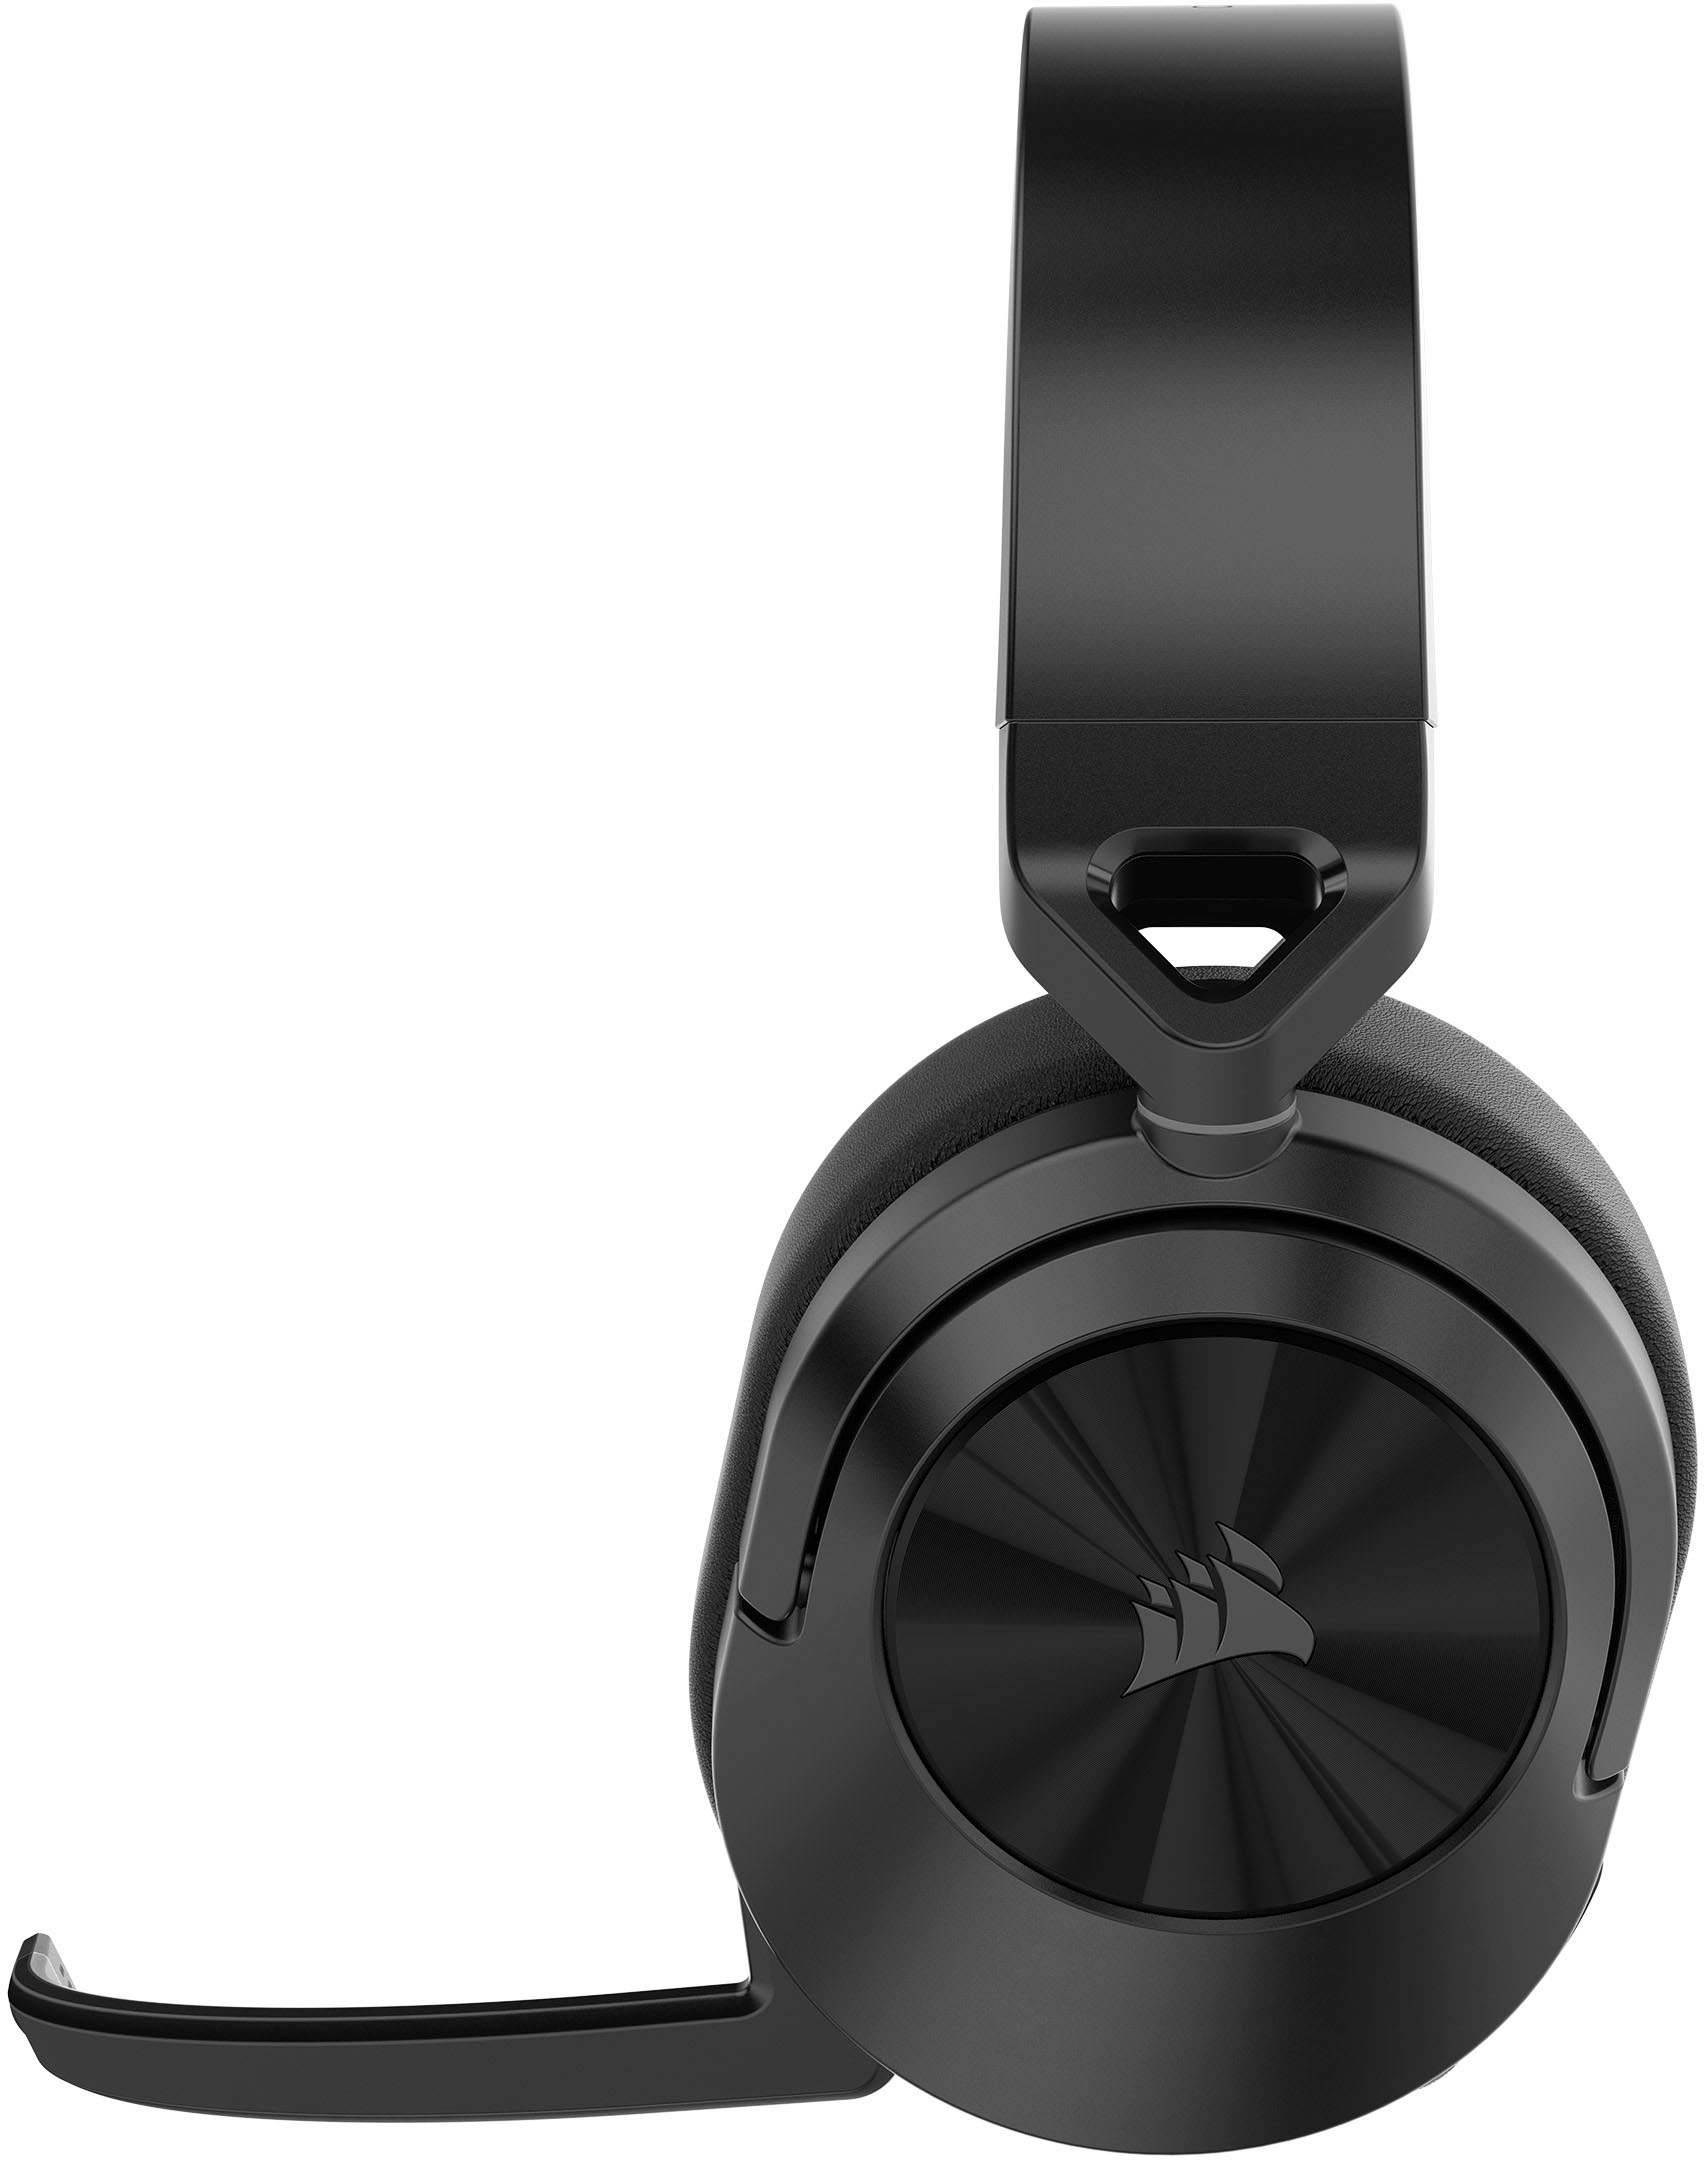 Corsair HS55 Stereo & HS65 Surround Gaming Headsets – New budget